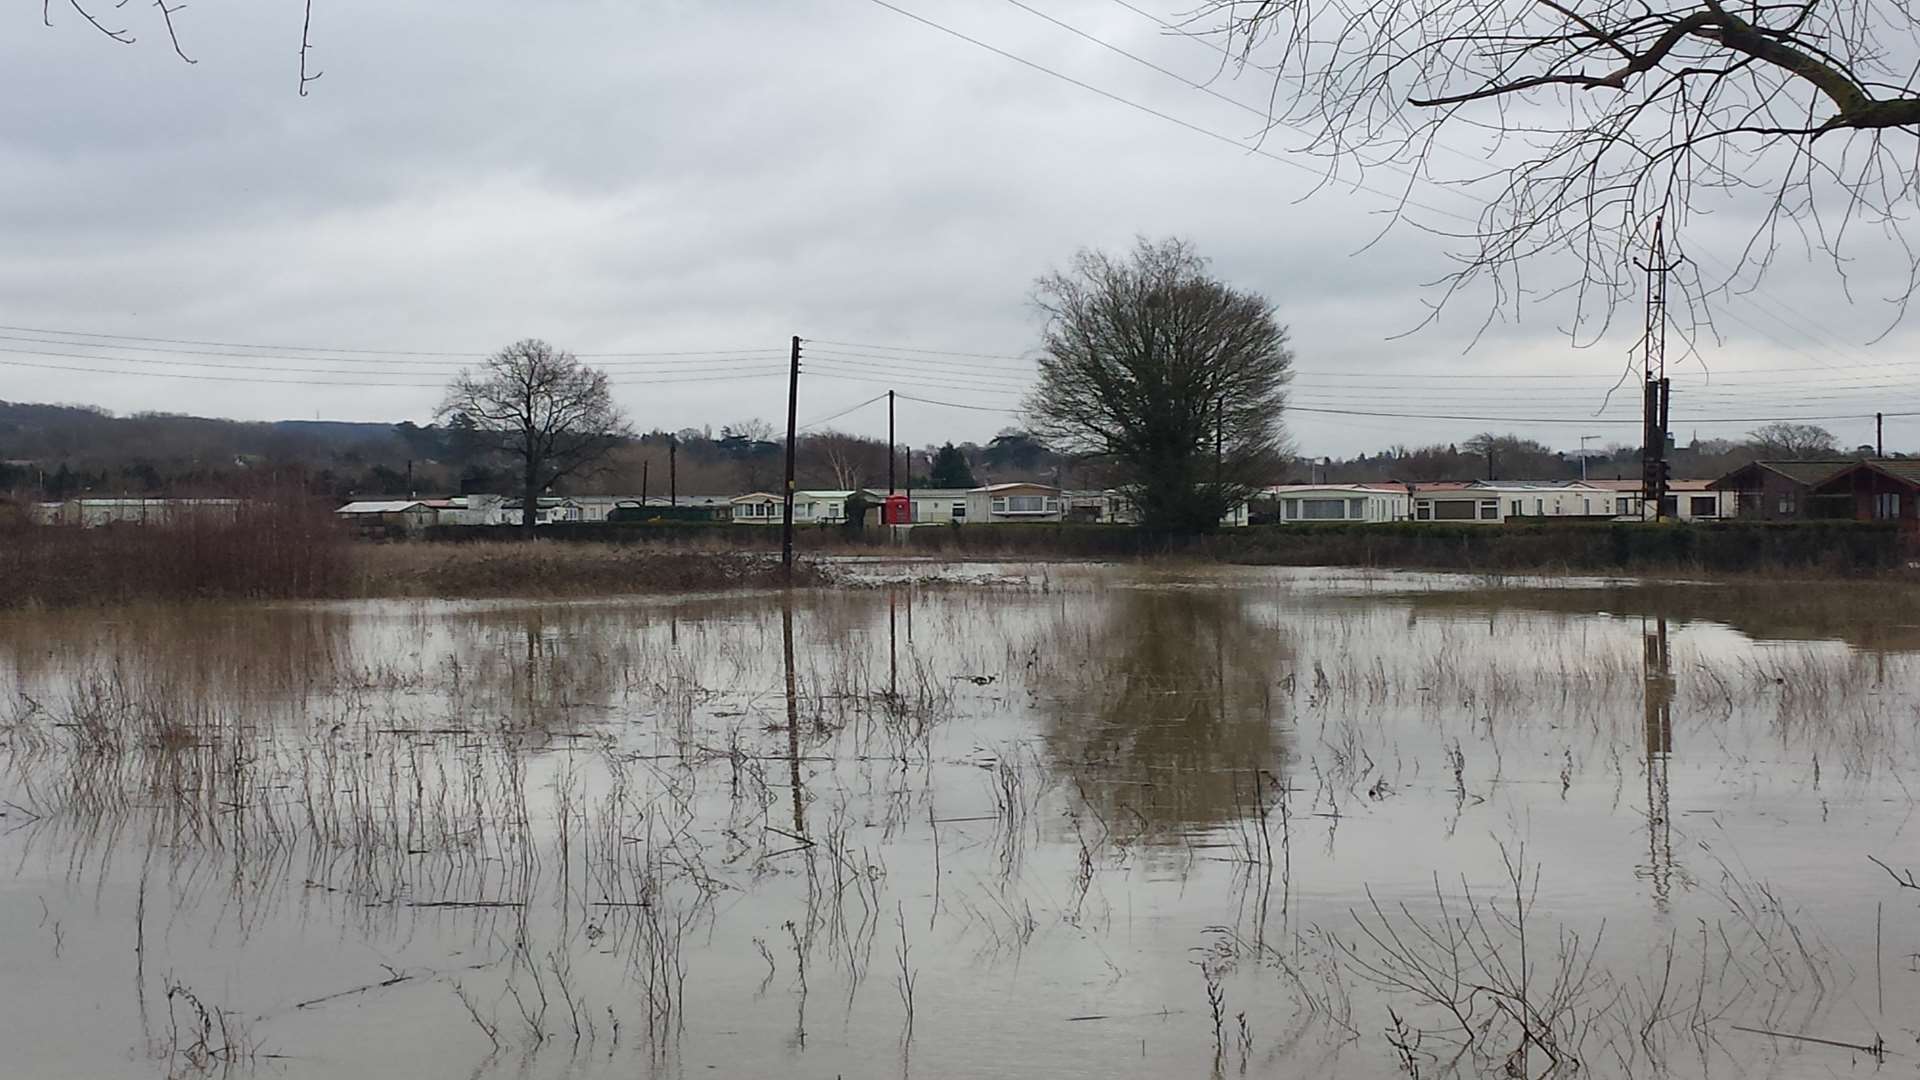 A field next to Little Venice caravan park became a lake this morning